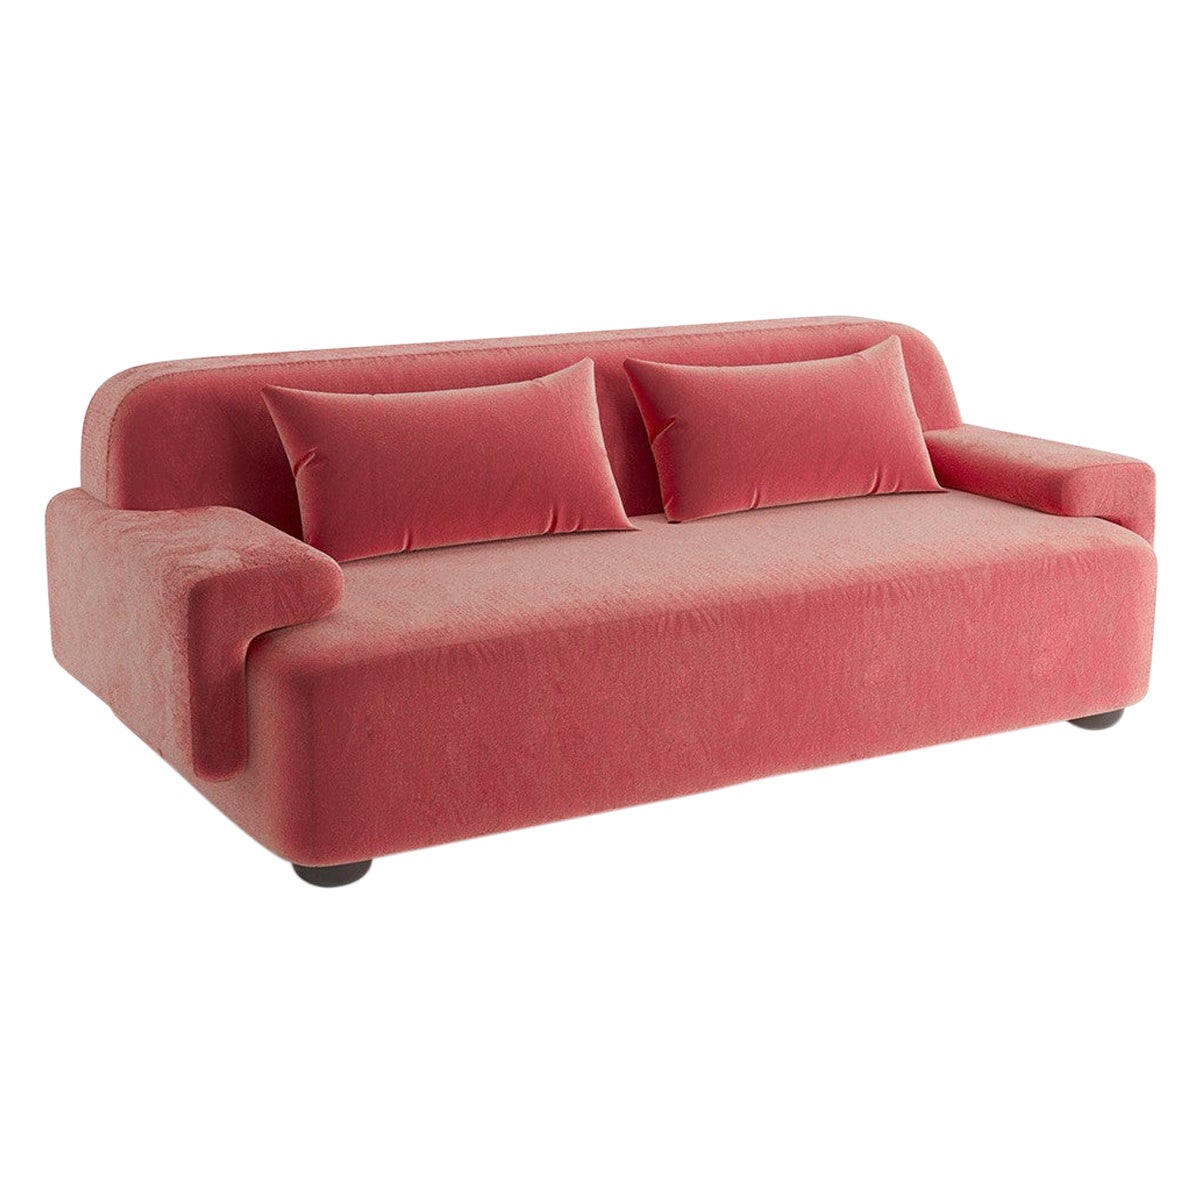 Popus Editions Lena 2.5 Seater Sofa in Pink Como Velvet Upholstery For Sale